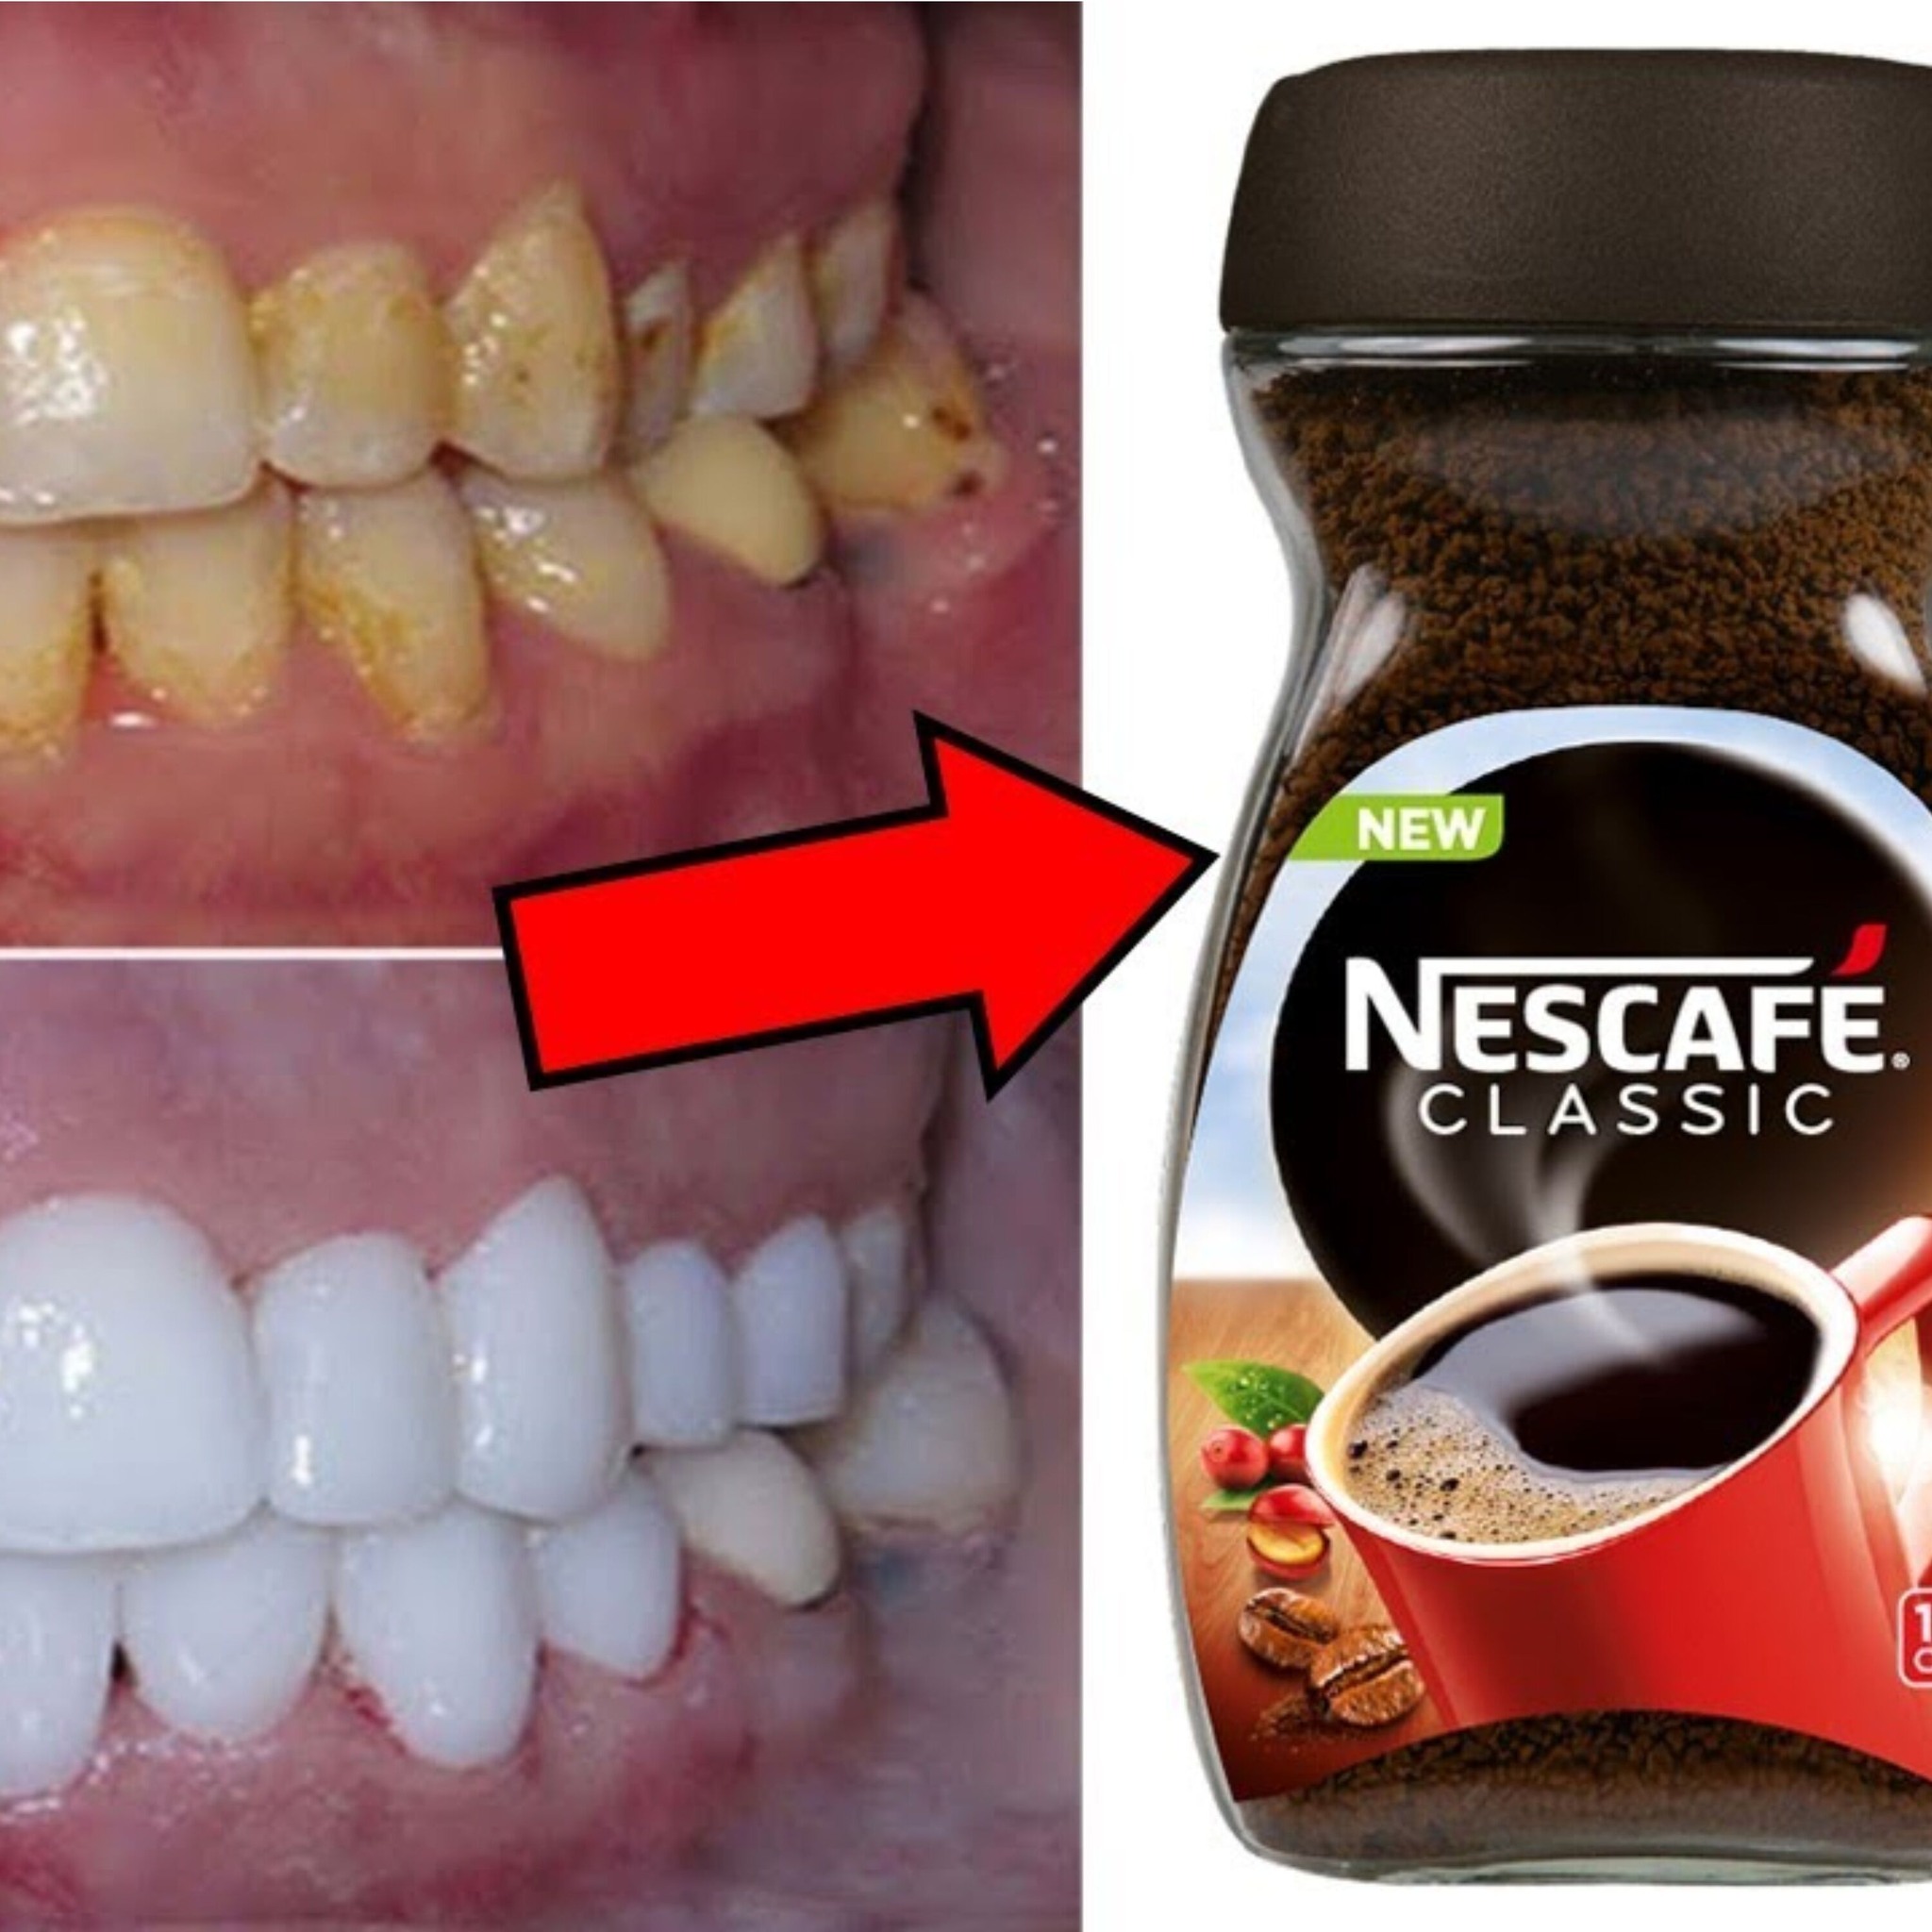 Brighten Your Smile Naturally with Instant Coffee